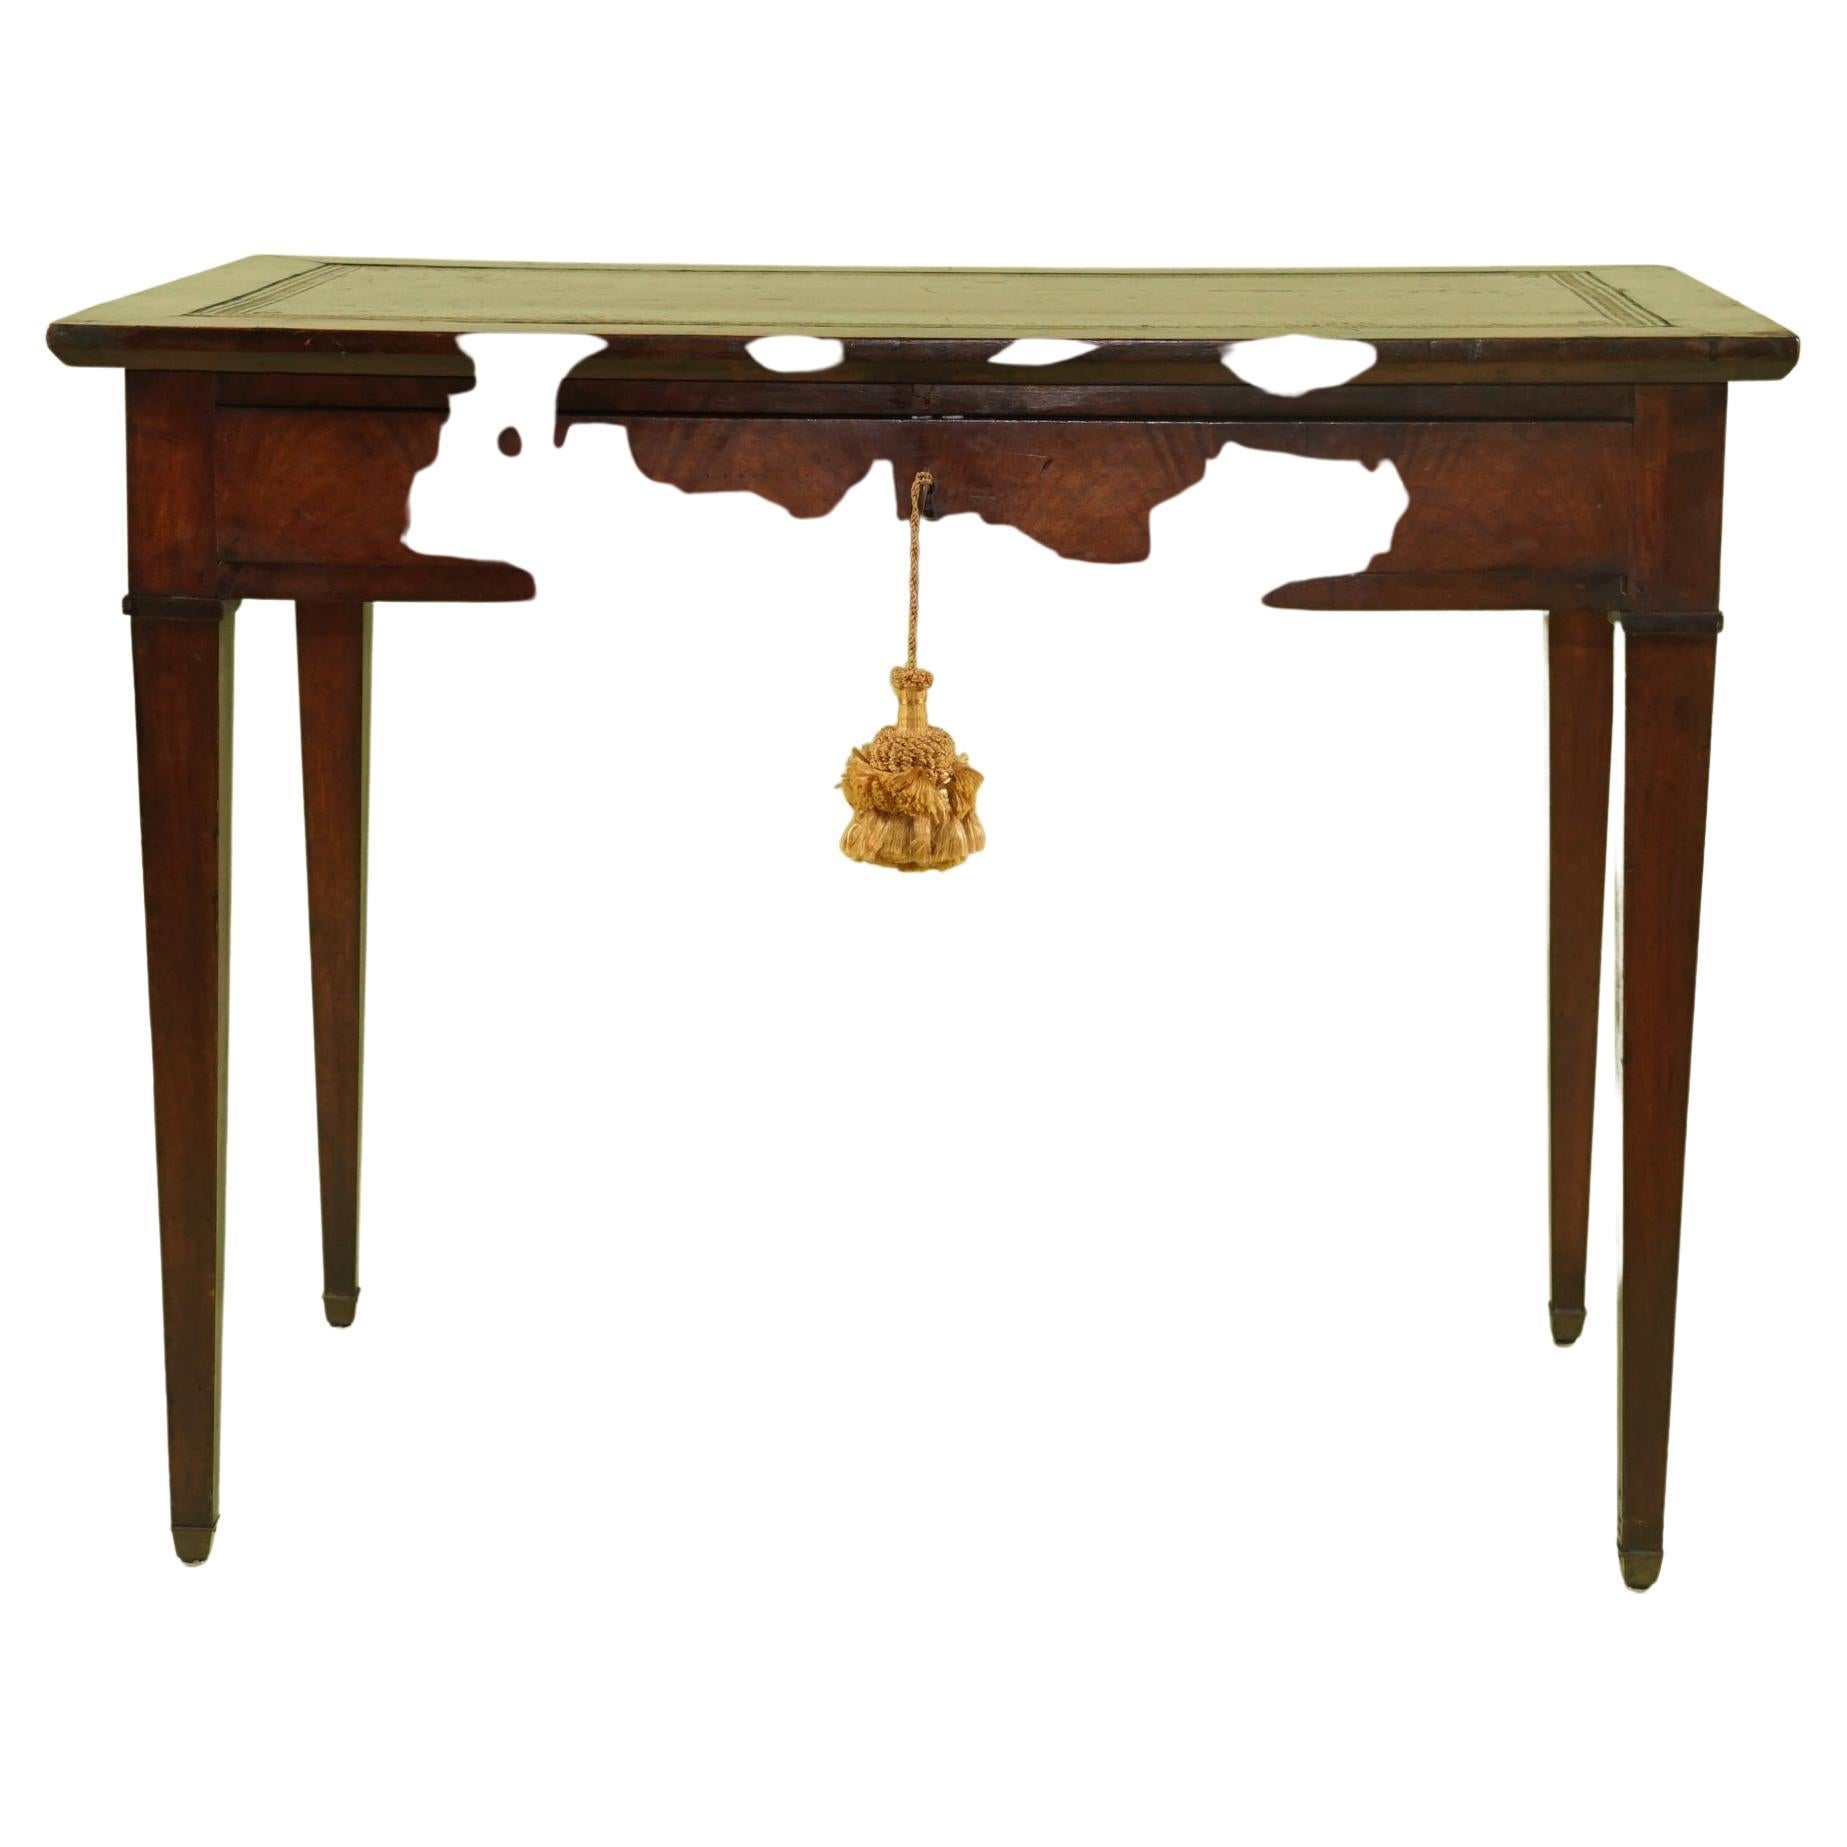 Period French Directior Leather Topped Writing Table. For Sale